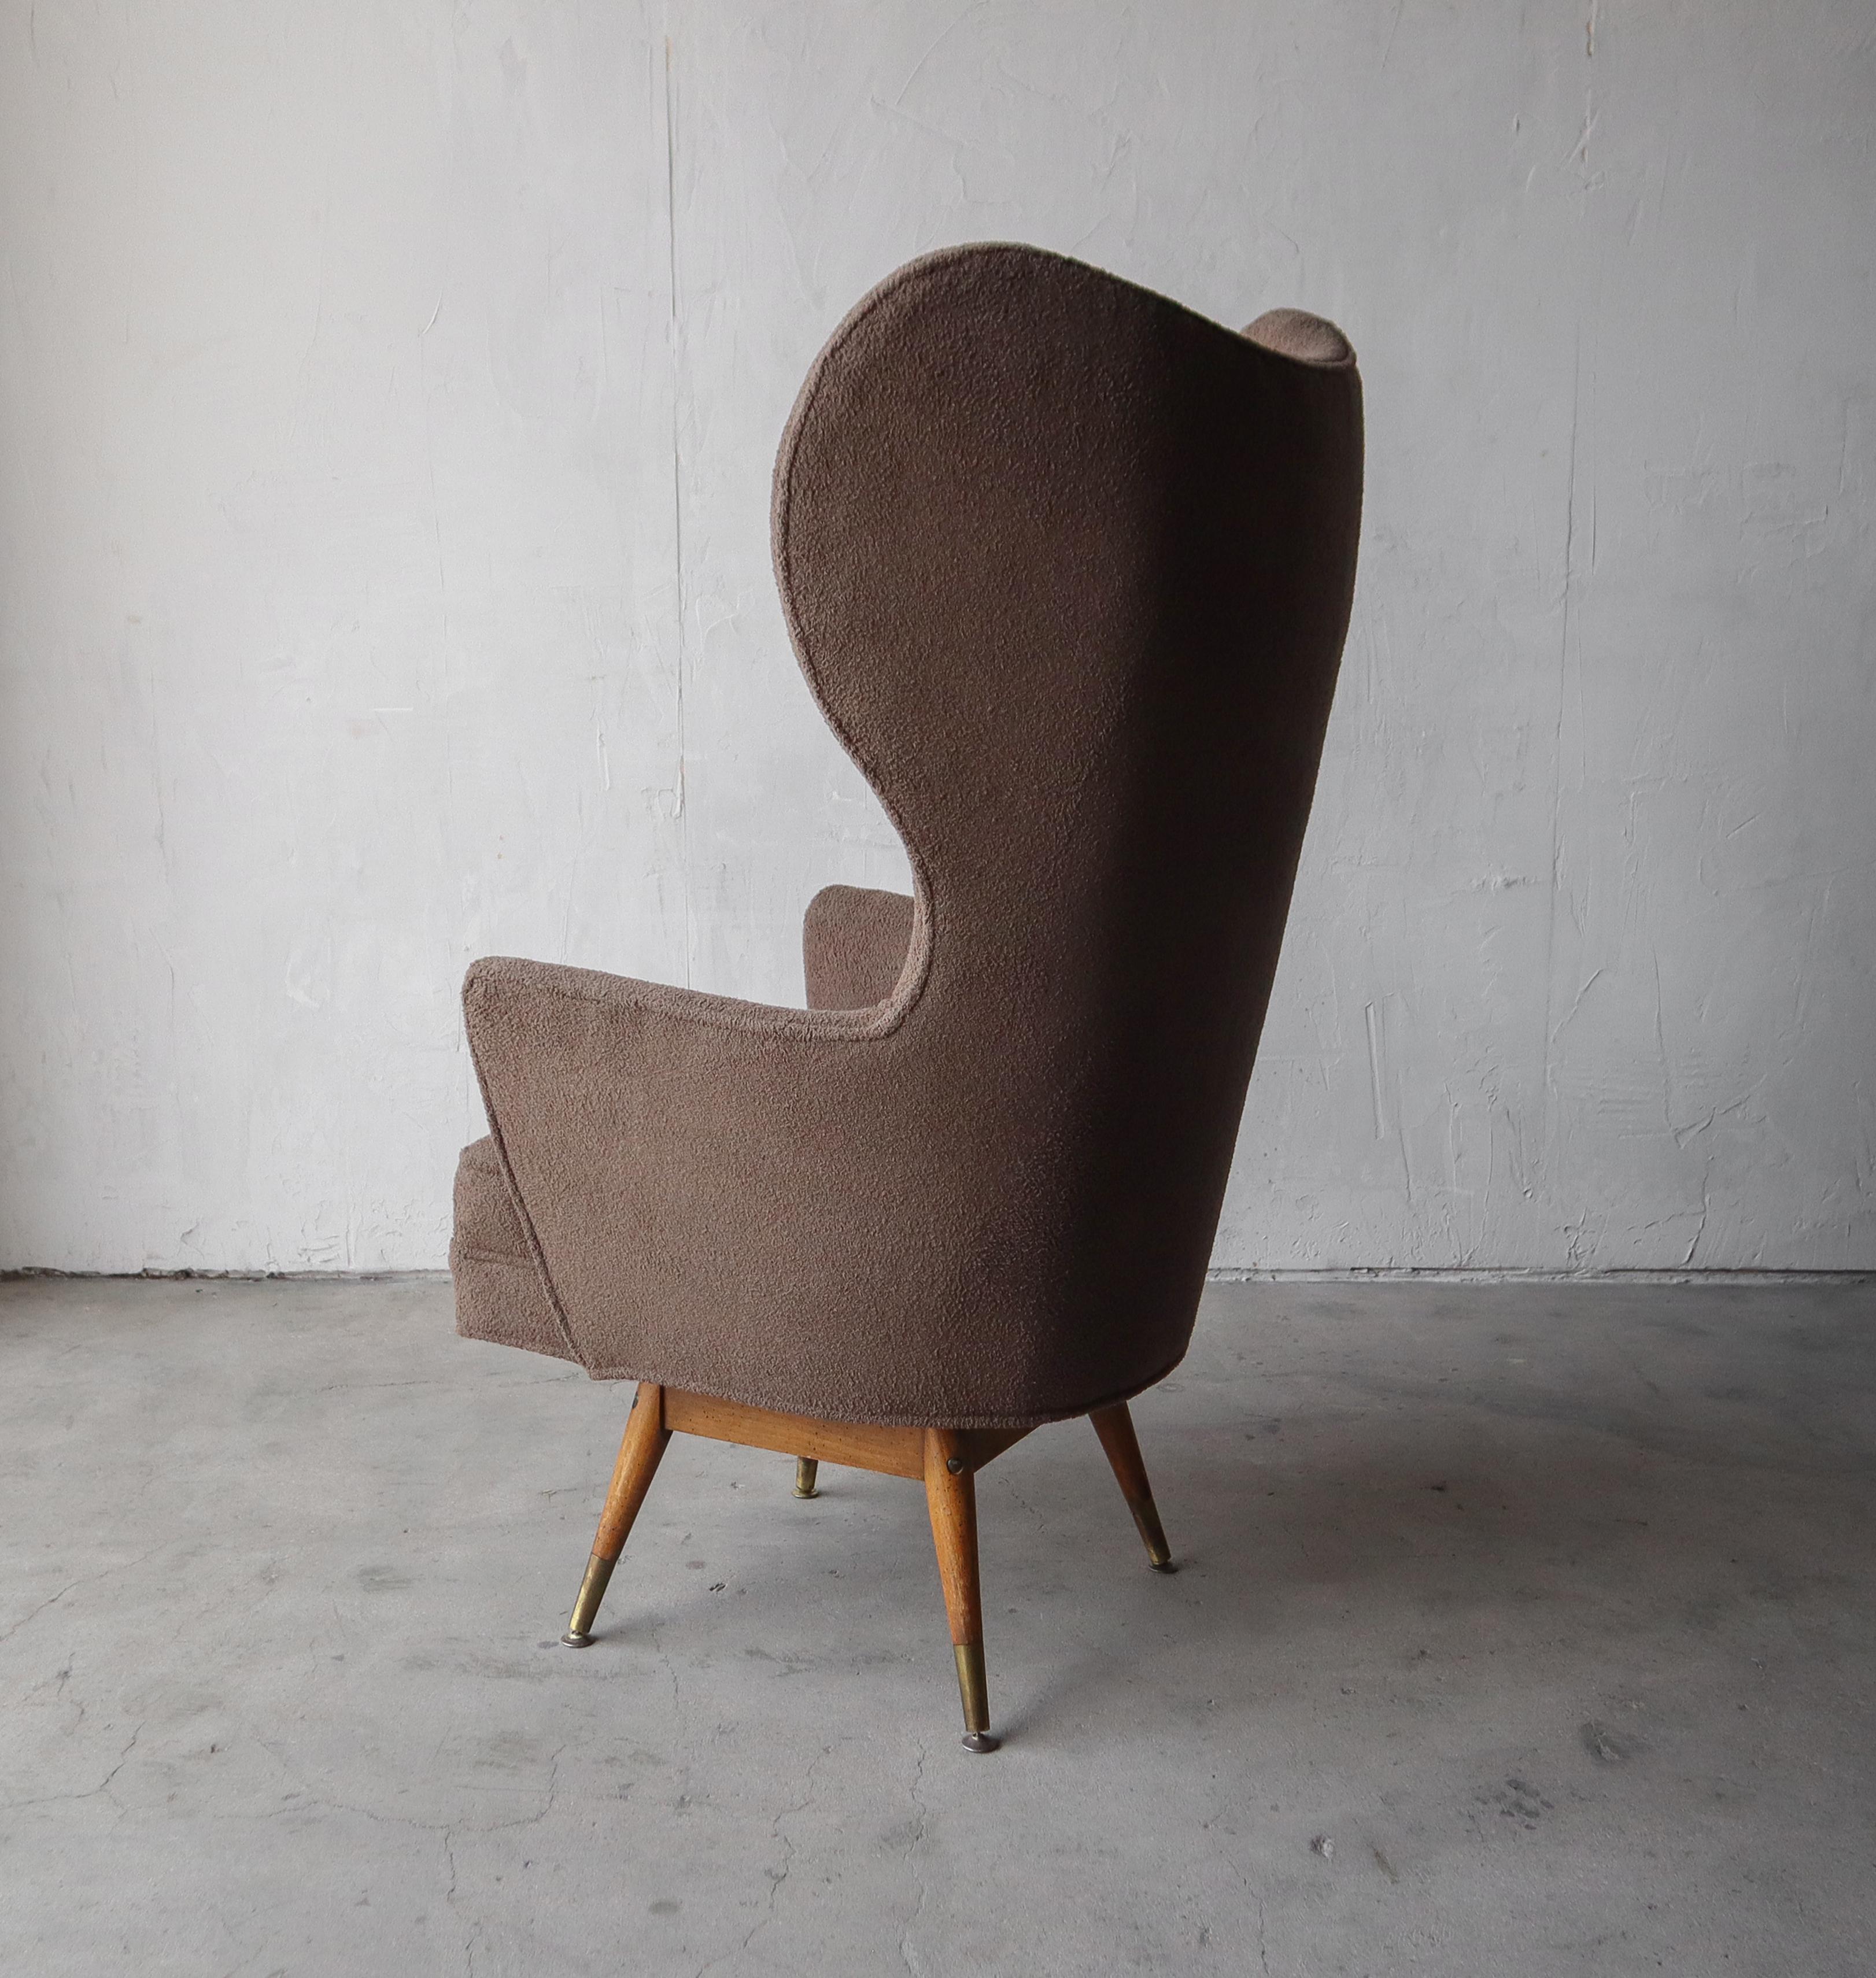 20th Century Midcentury Sculptural High Back Swivel Chair For Sale